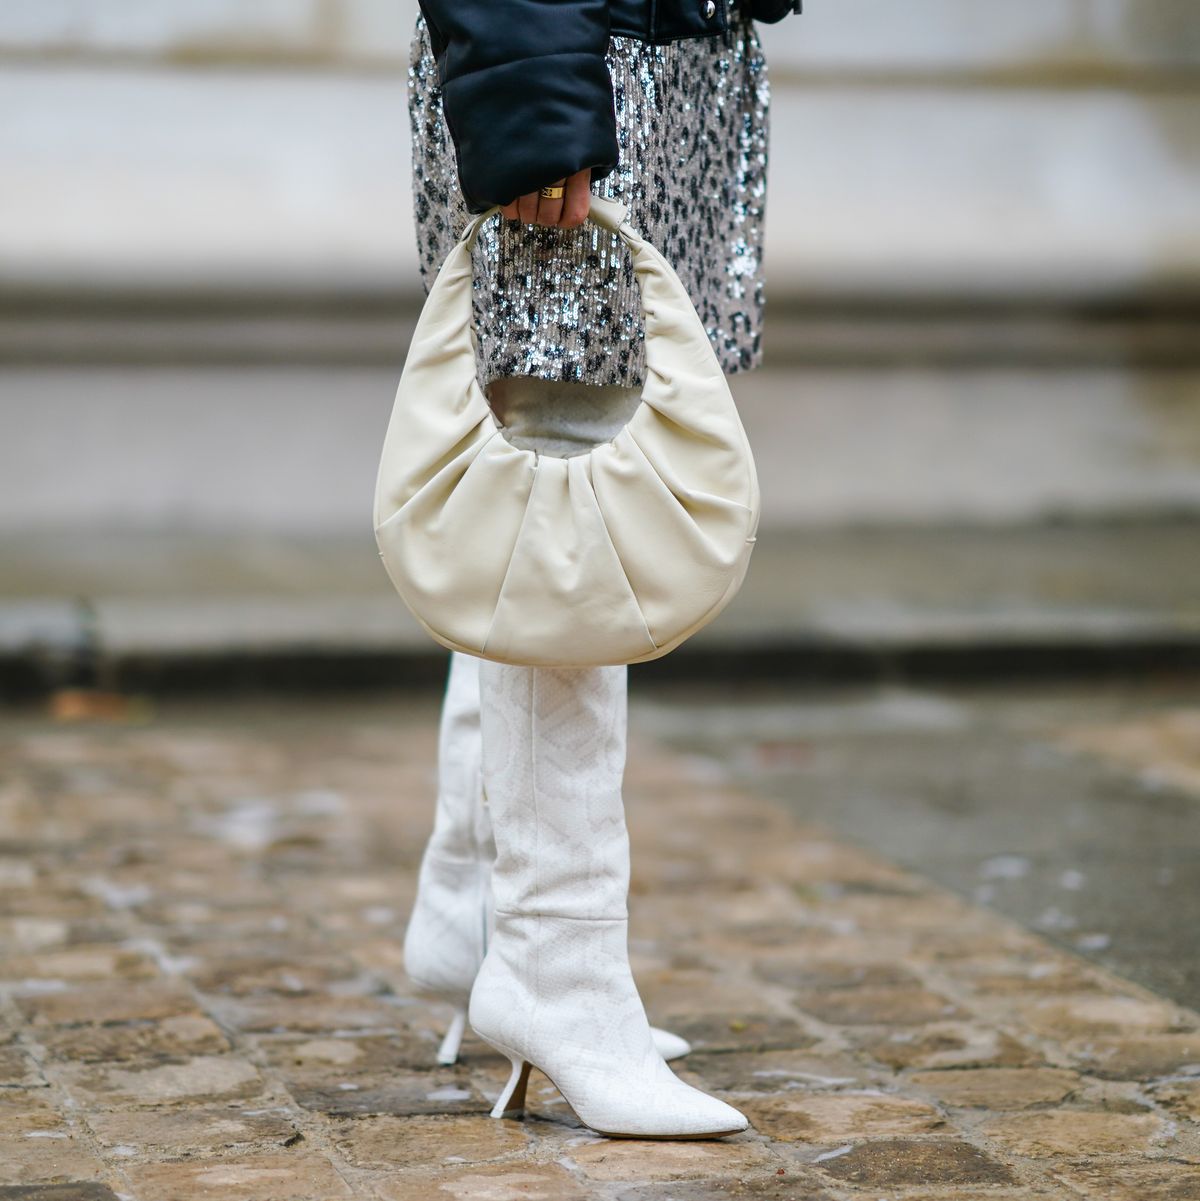 chanel black and white ankle boots